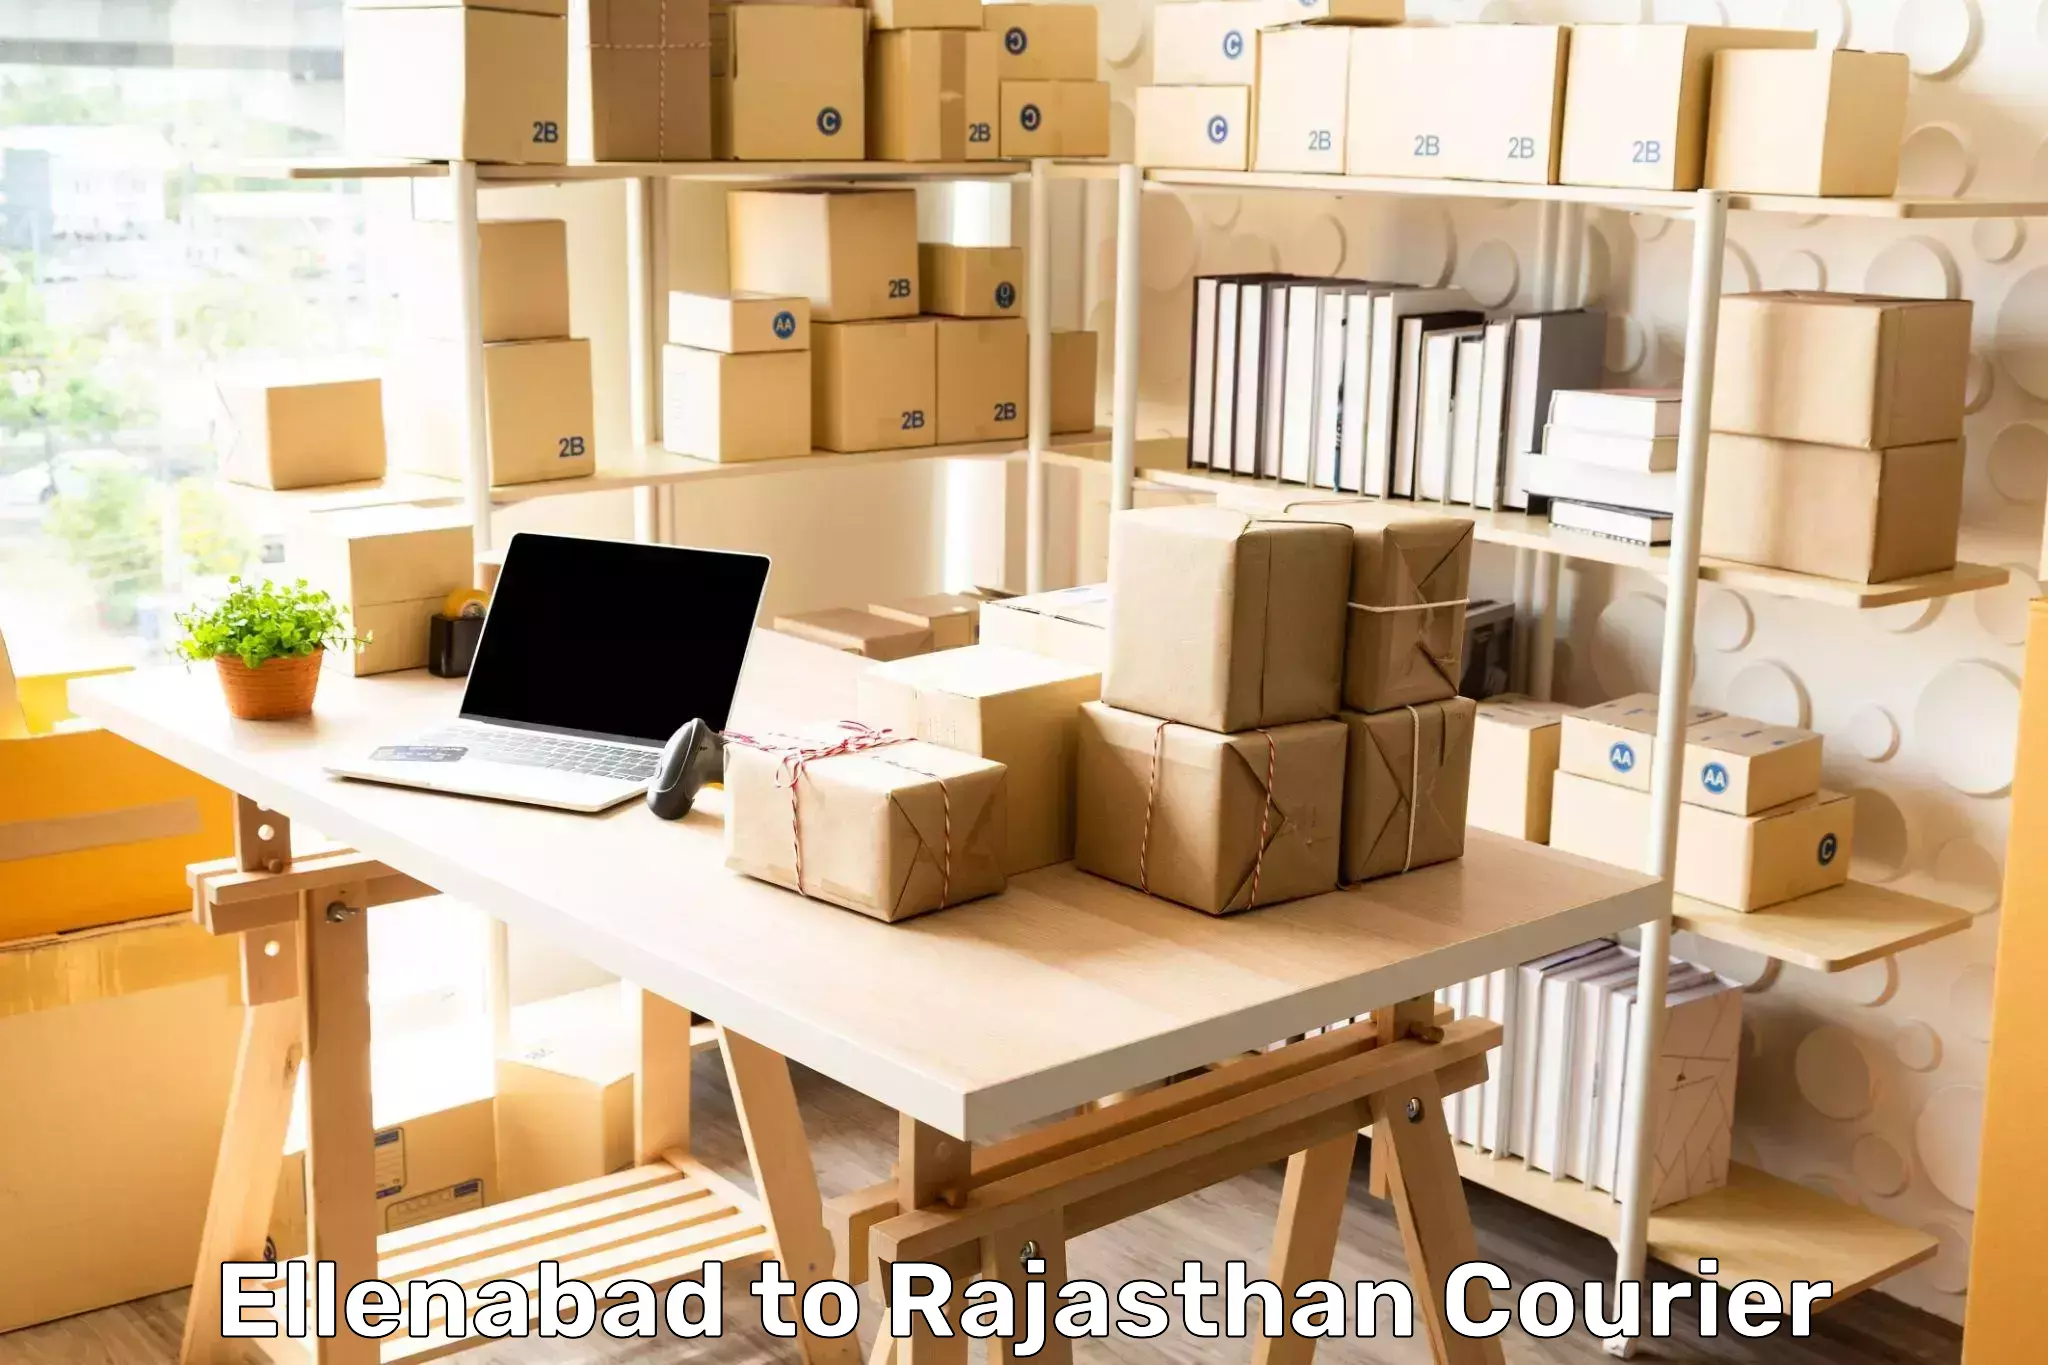 Express mail solutions Ellenabad to Jaipur